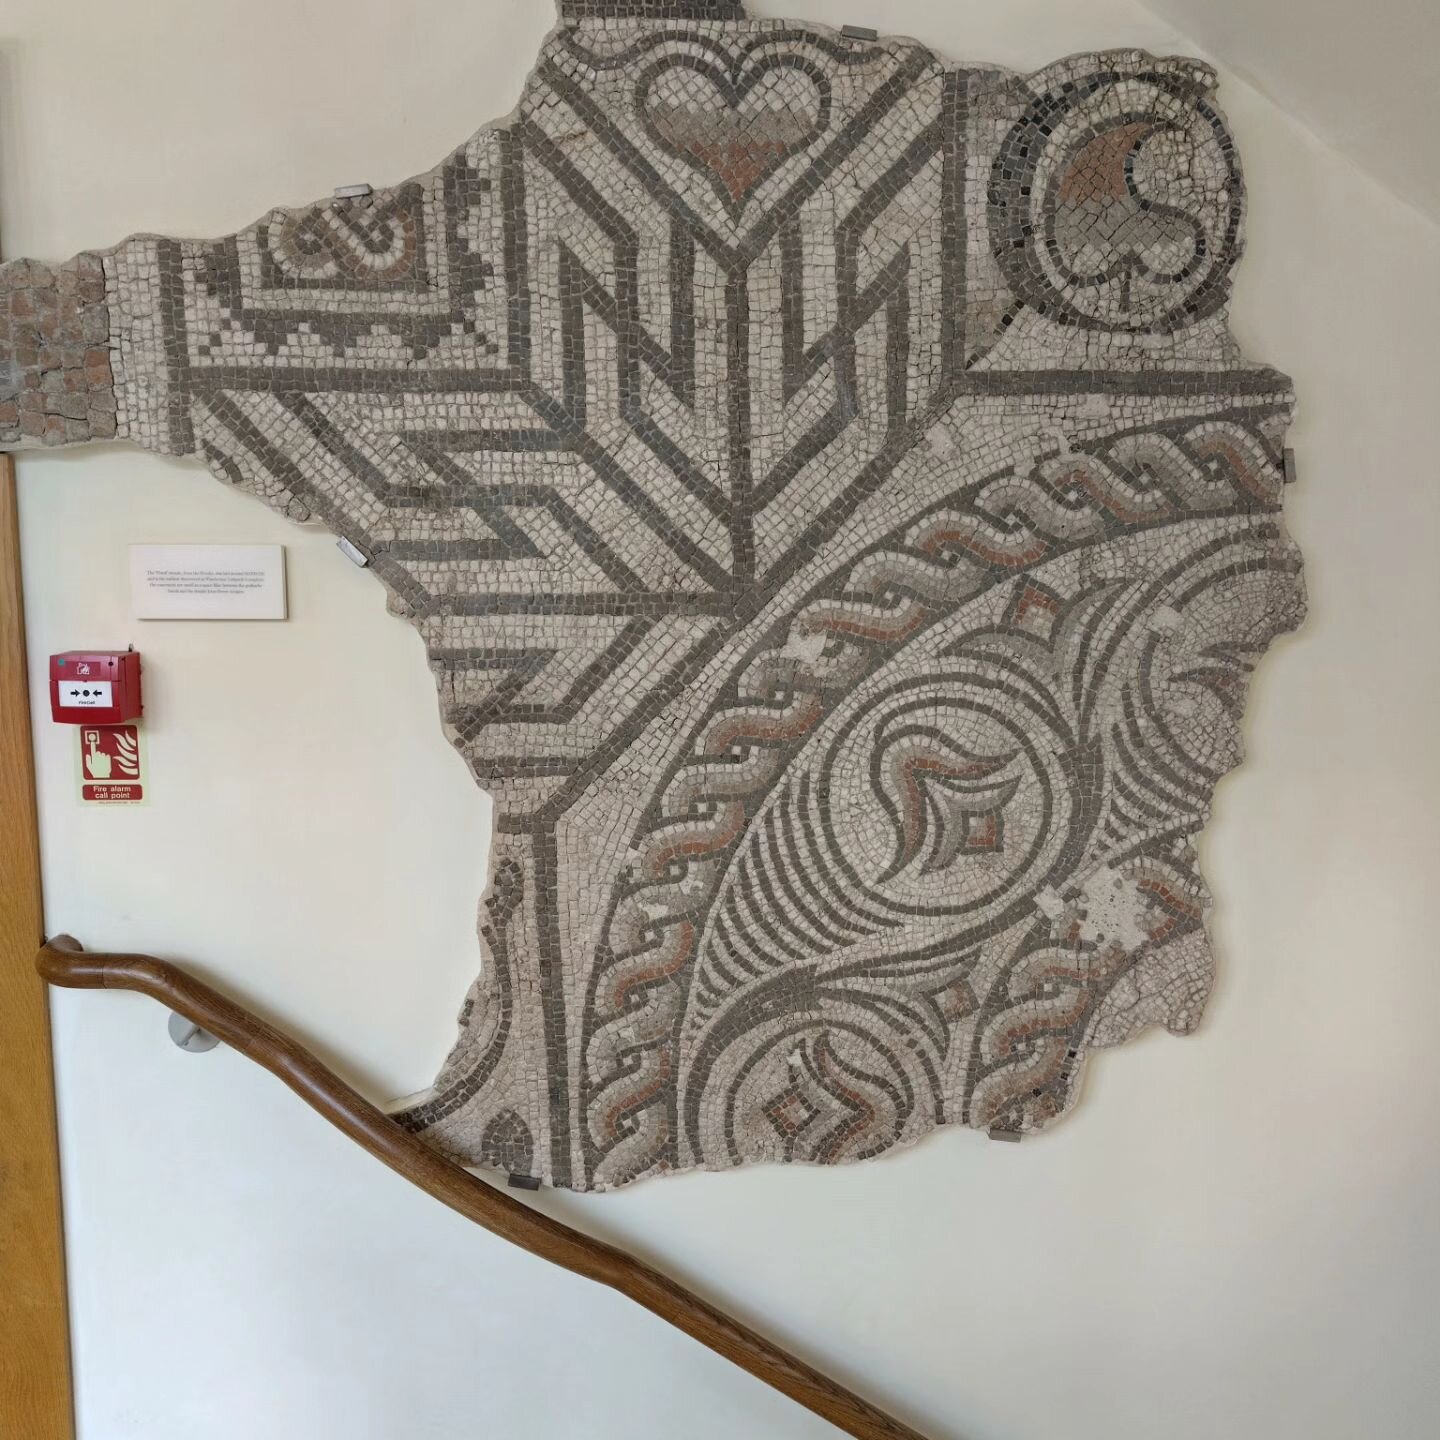 Two wonderful workshops as part of the Heritage Open Days completed. I met a lot of fun and creative people. This was a collaboration with the University of Winchester and the City Museum. We got to see the original mosaics before reconstructing a de